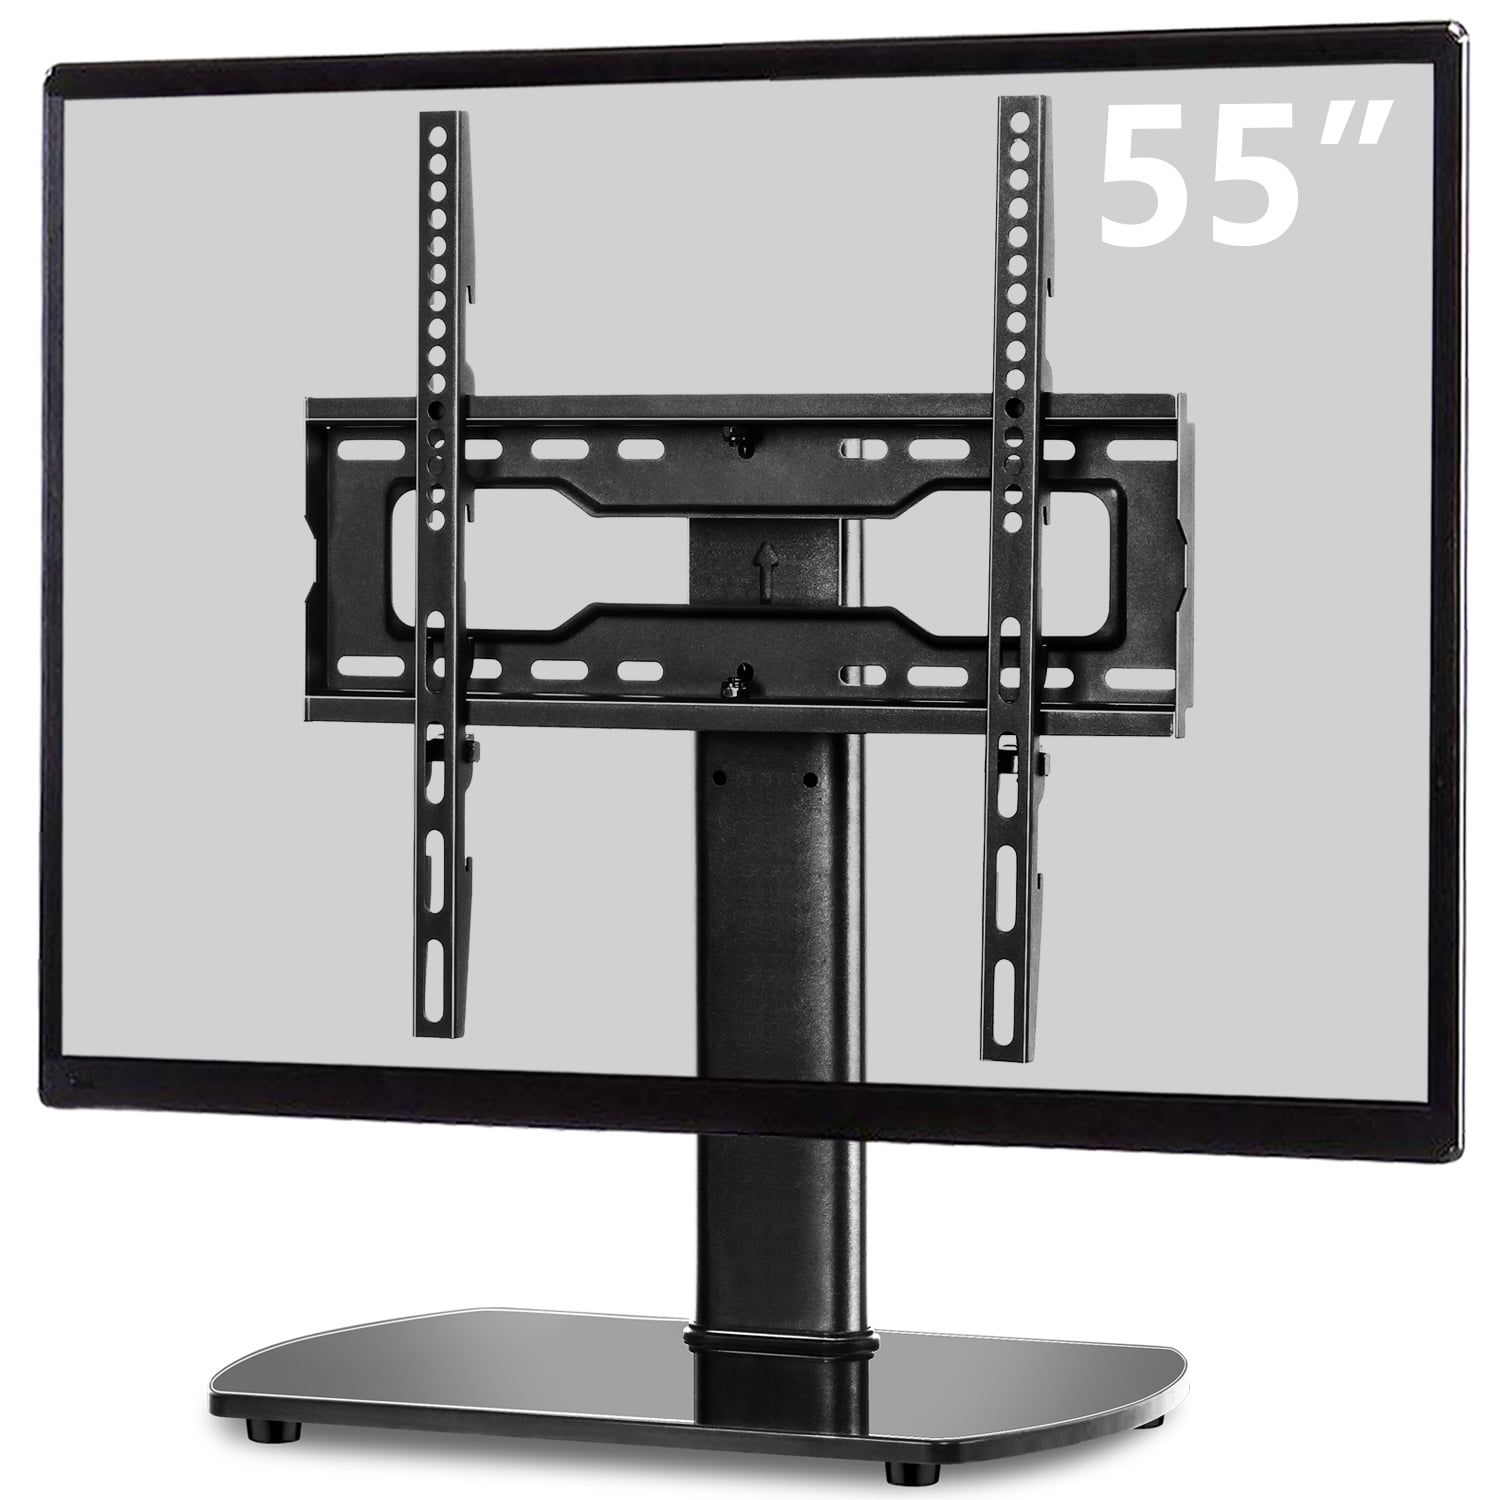 5rcom Universal Table Top Tv Stand Base With Swivel Mount For Tvs Up To With Universal Tabletop Tv Stands (Gallery 19 of 20)